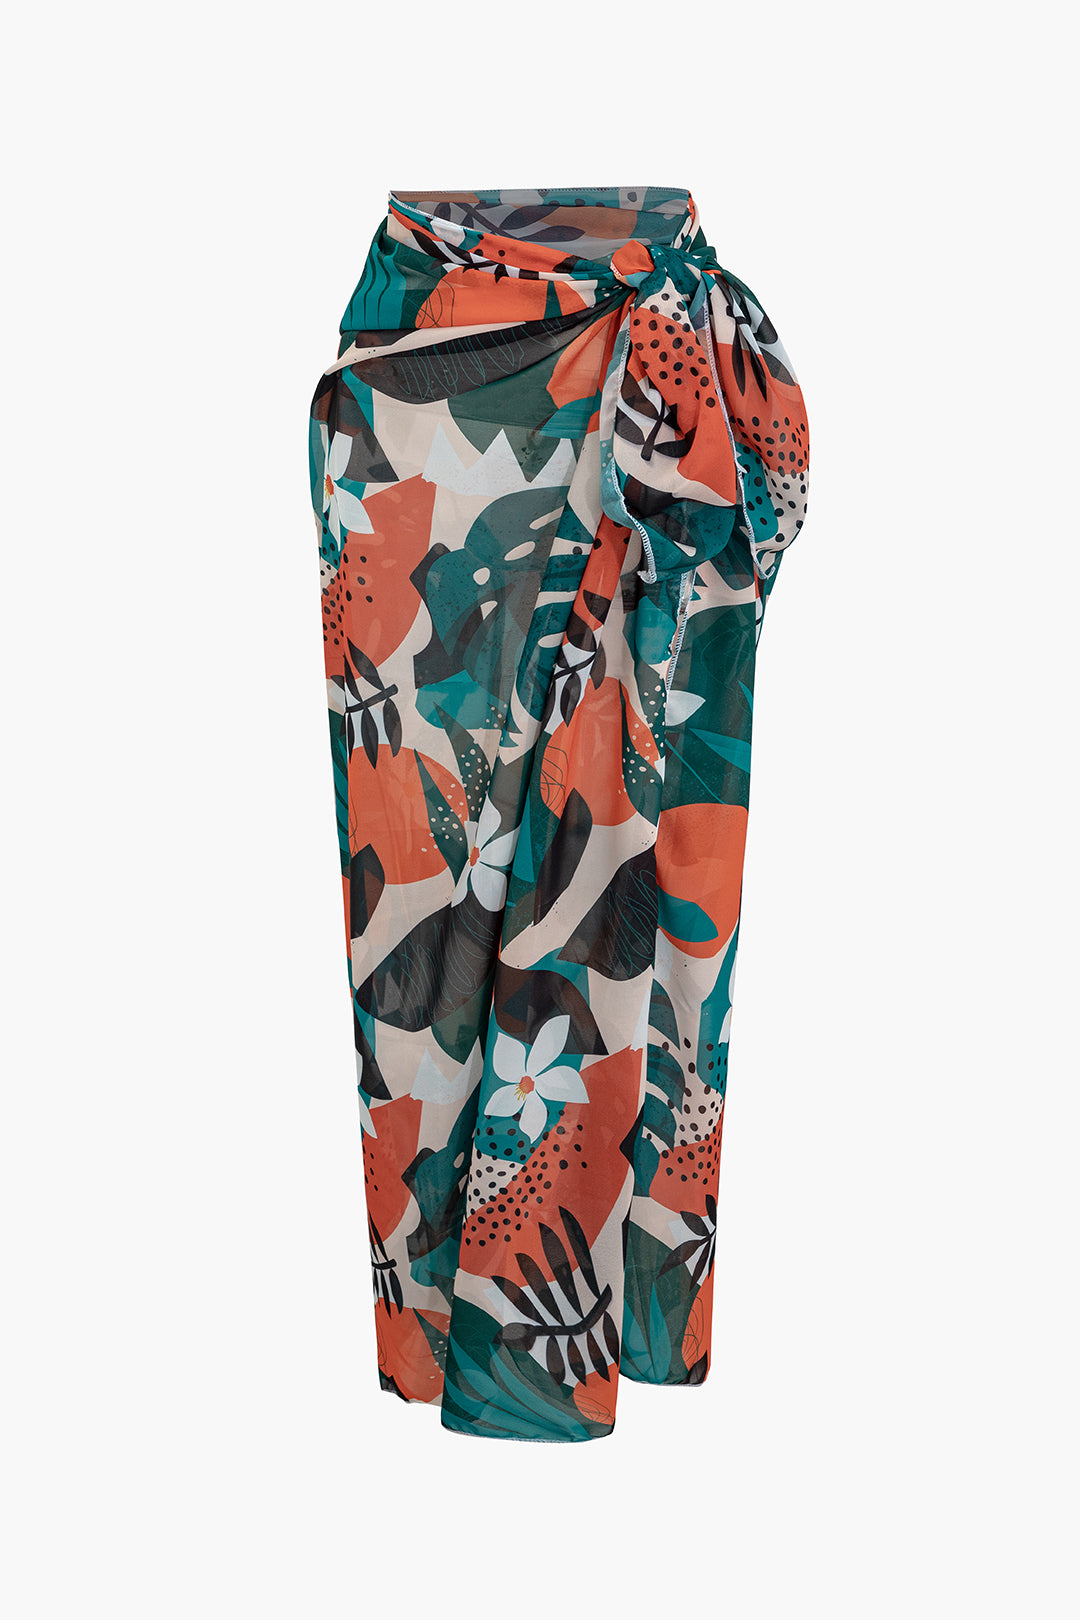 Abstract Print Knot Cover Up